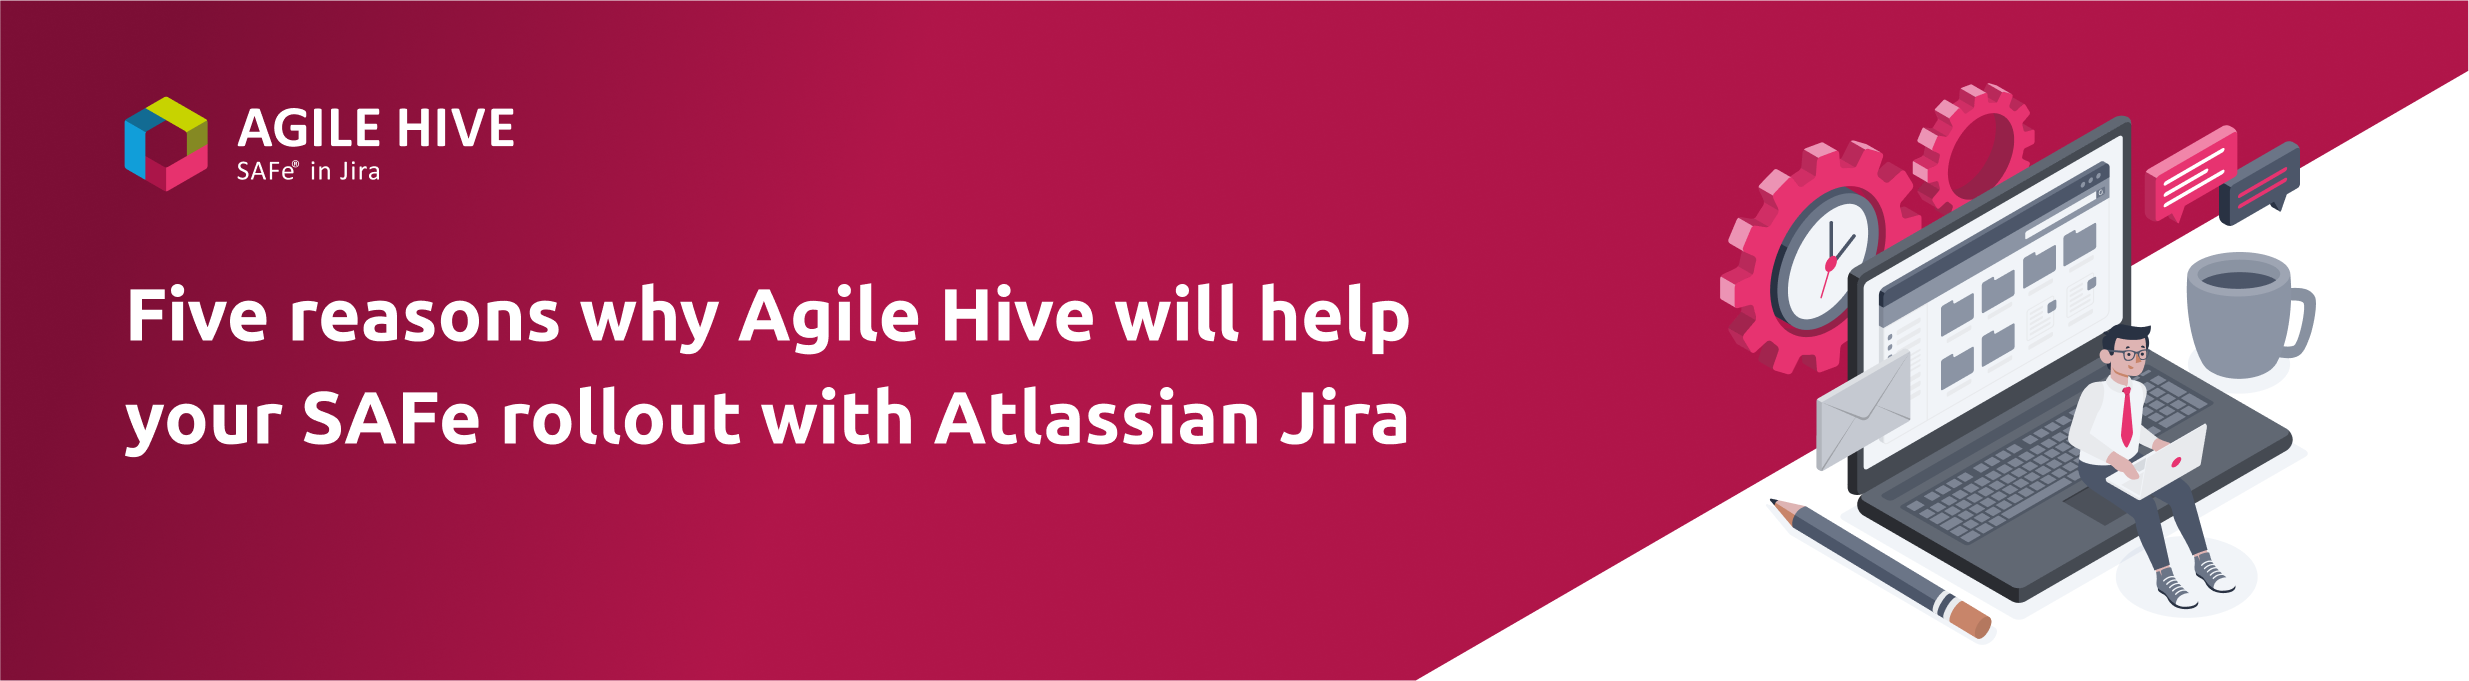 5 reasons why agile hive will help your rollout with Atlassian Jira - banner